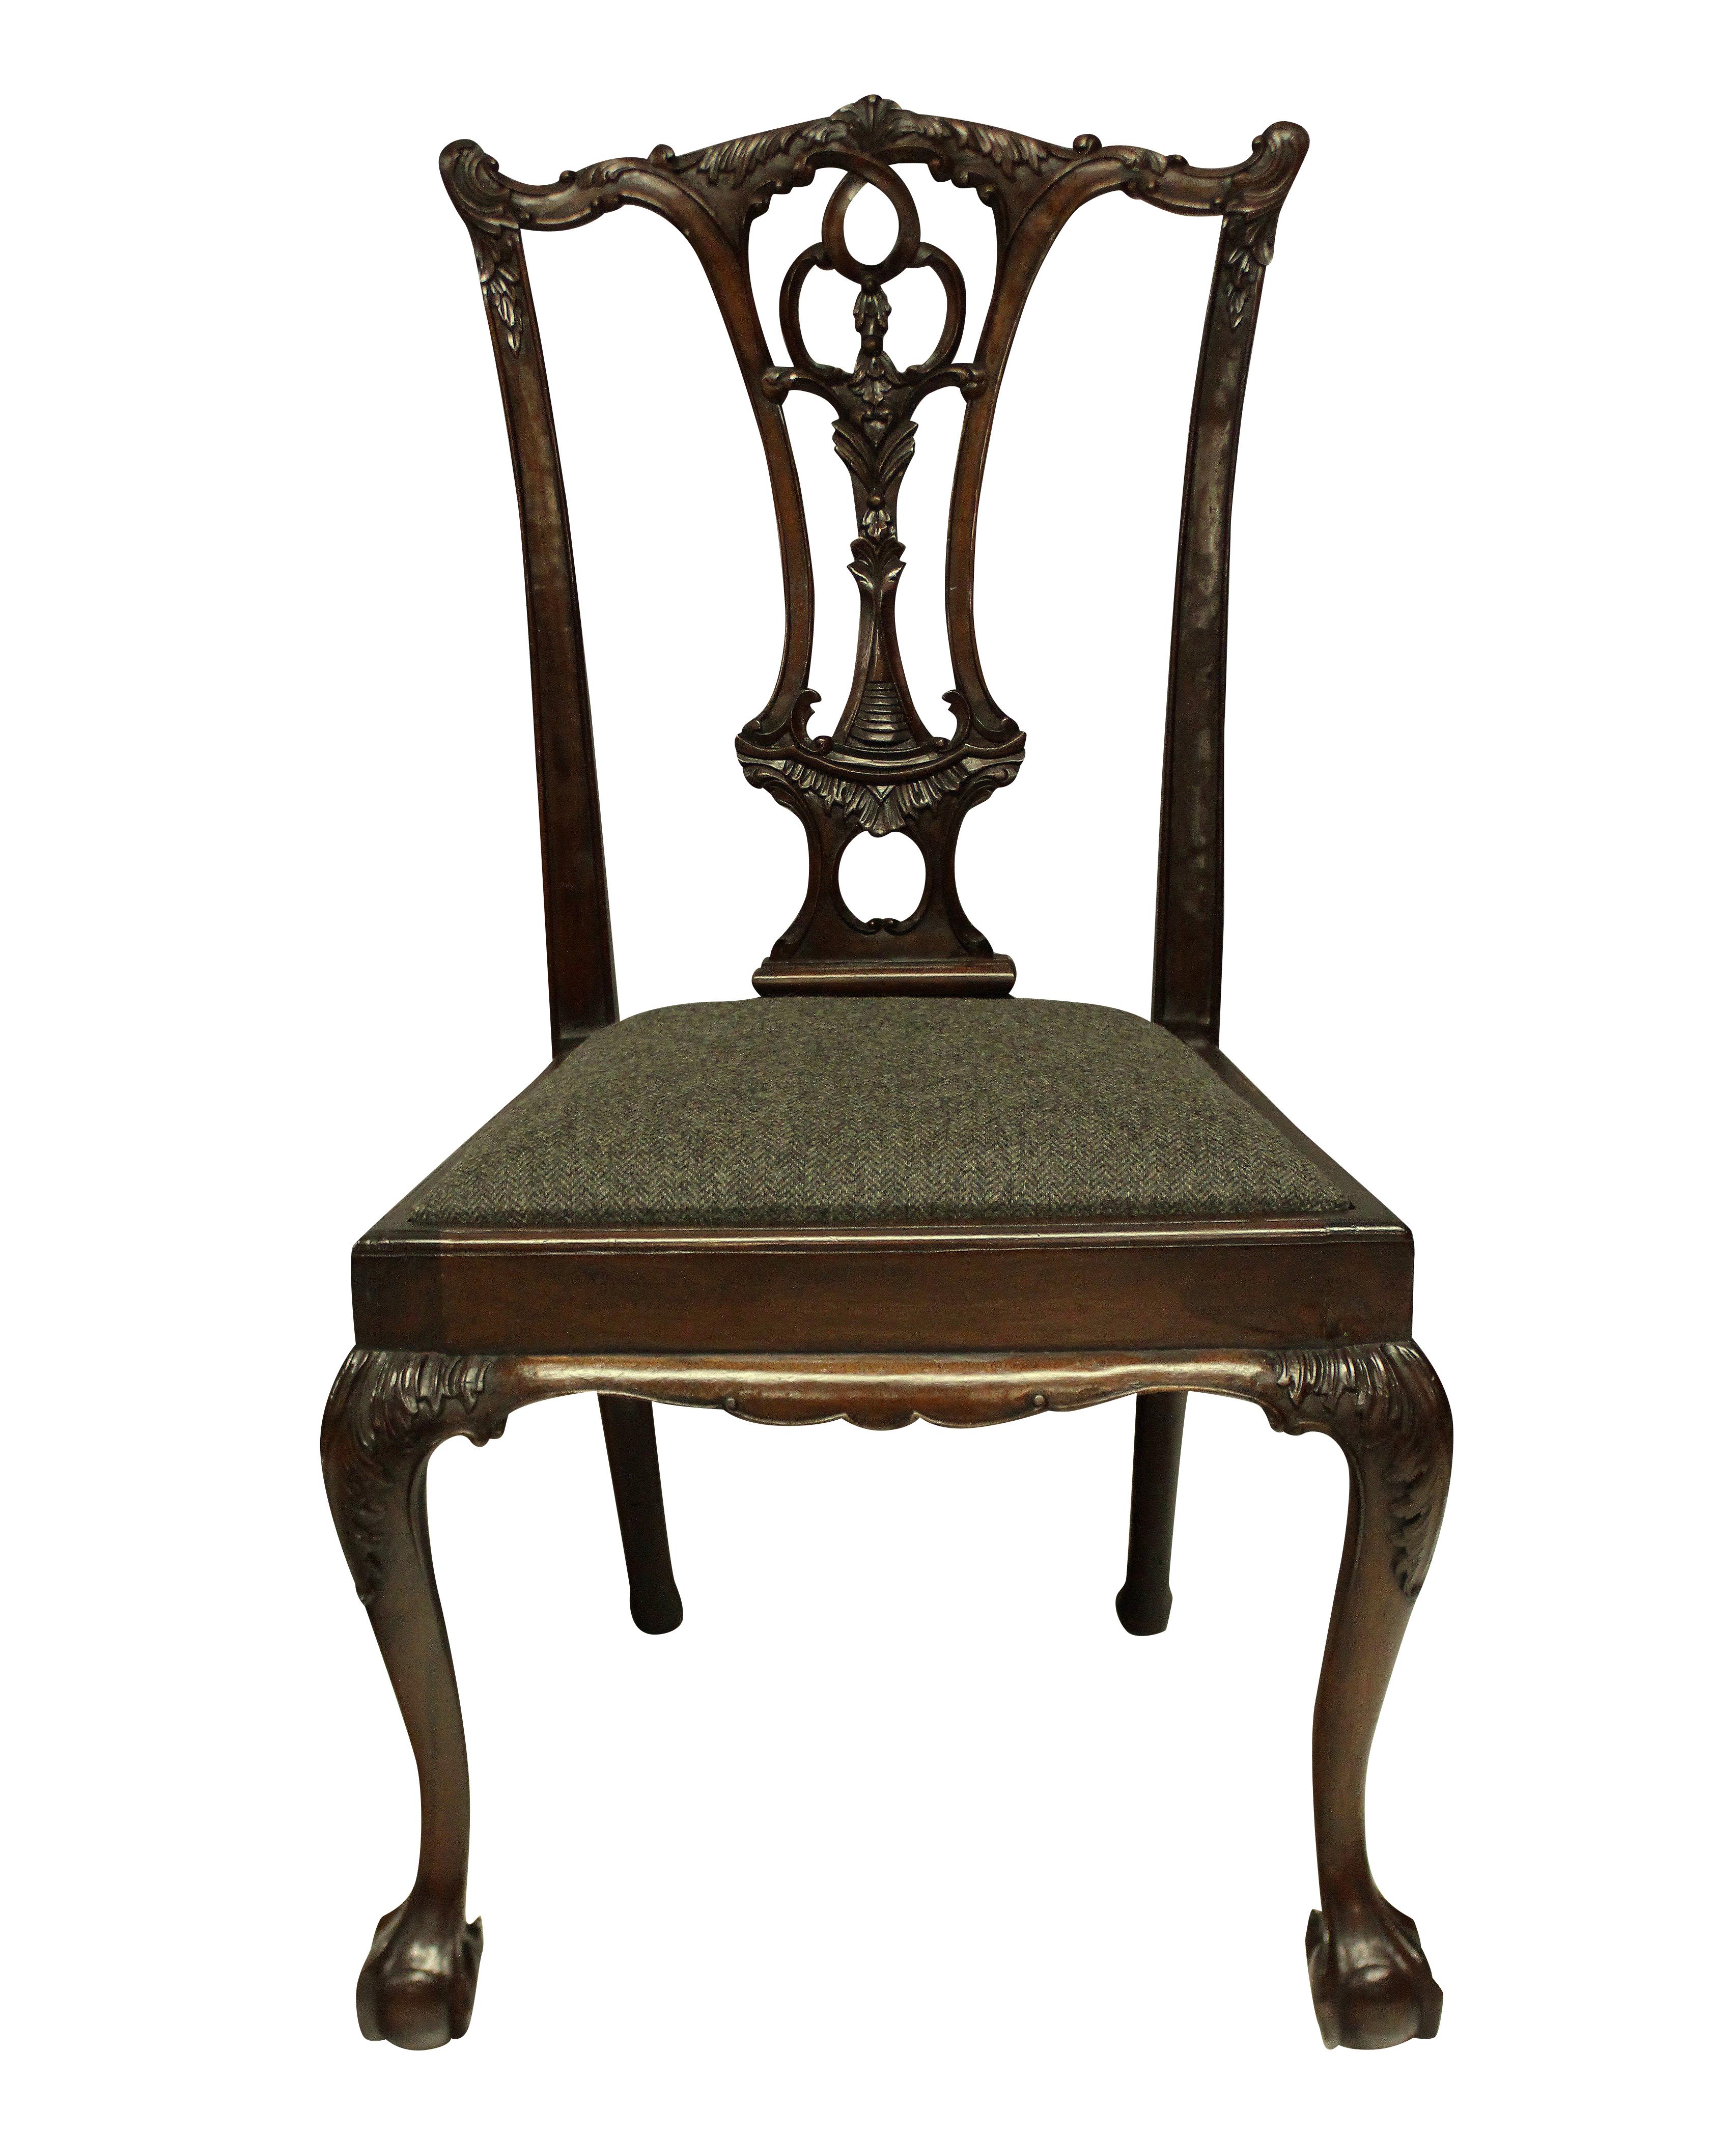 A set of eight English, carved mahogany Chippendale style dining chairs, comprising six chairs and two carvers. Beautifully carved and with herringbone tweed seats.